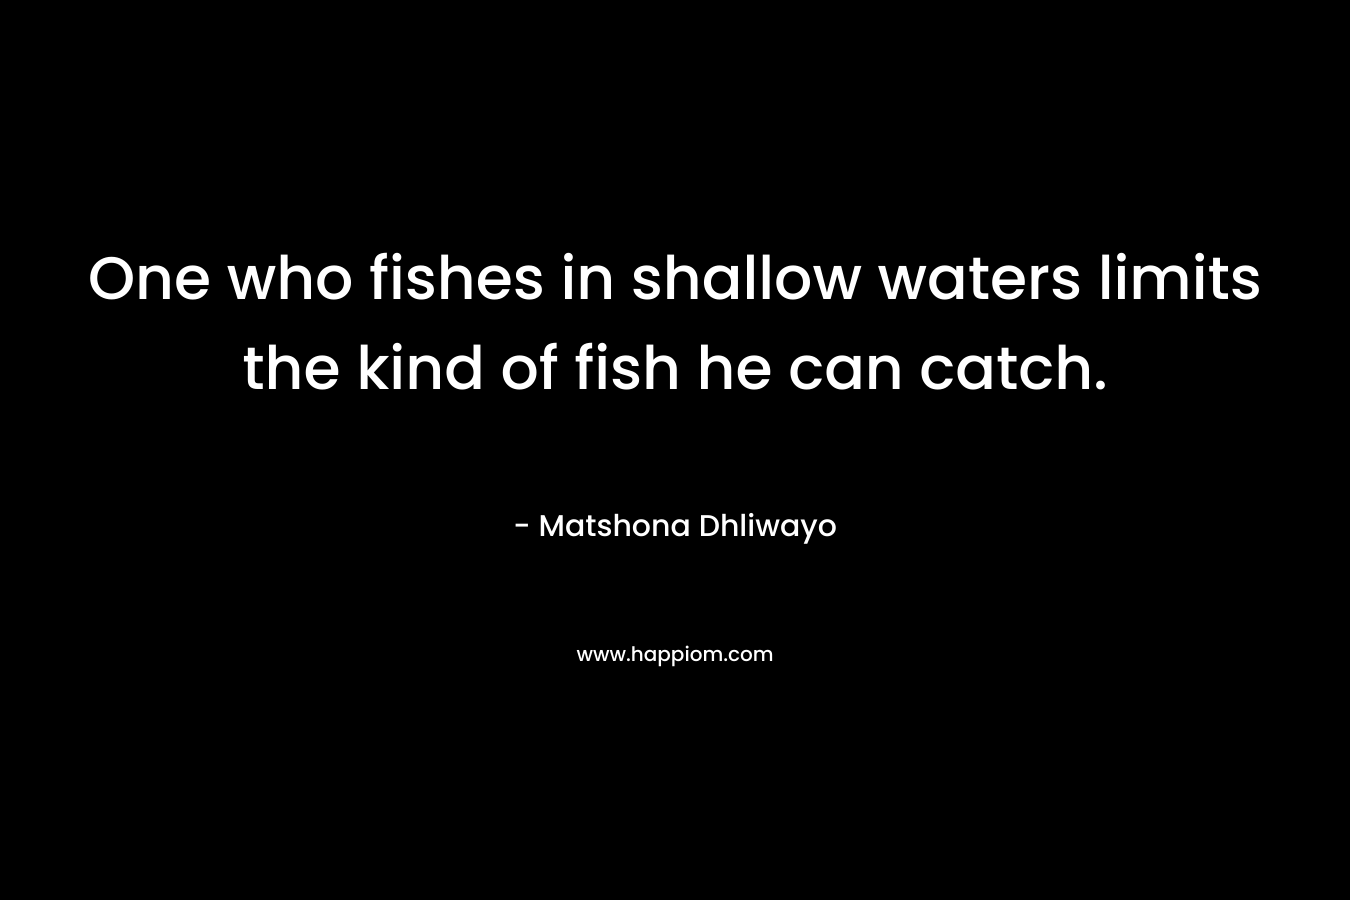 One who fishes in shallow waters limits the kind of fish he can catch. – Matshona Dhliwayo